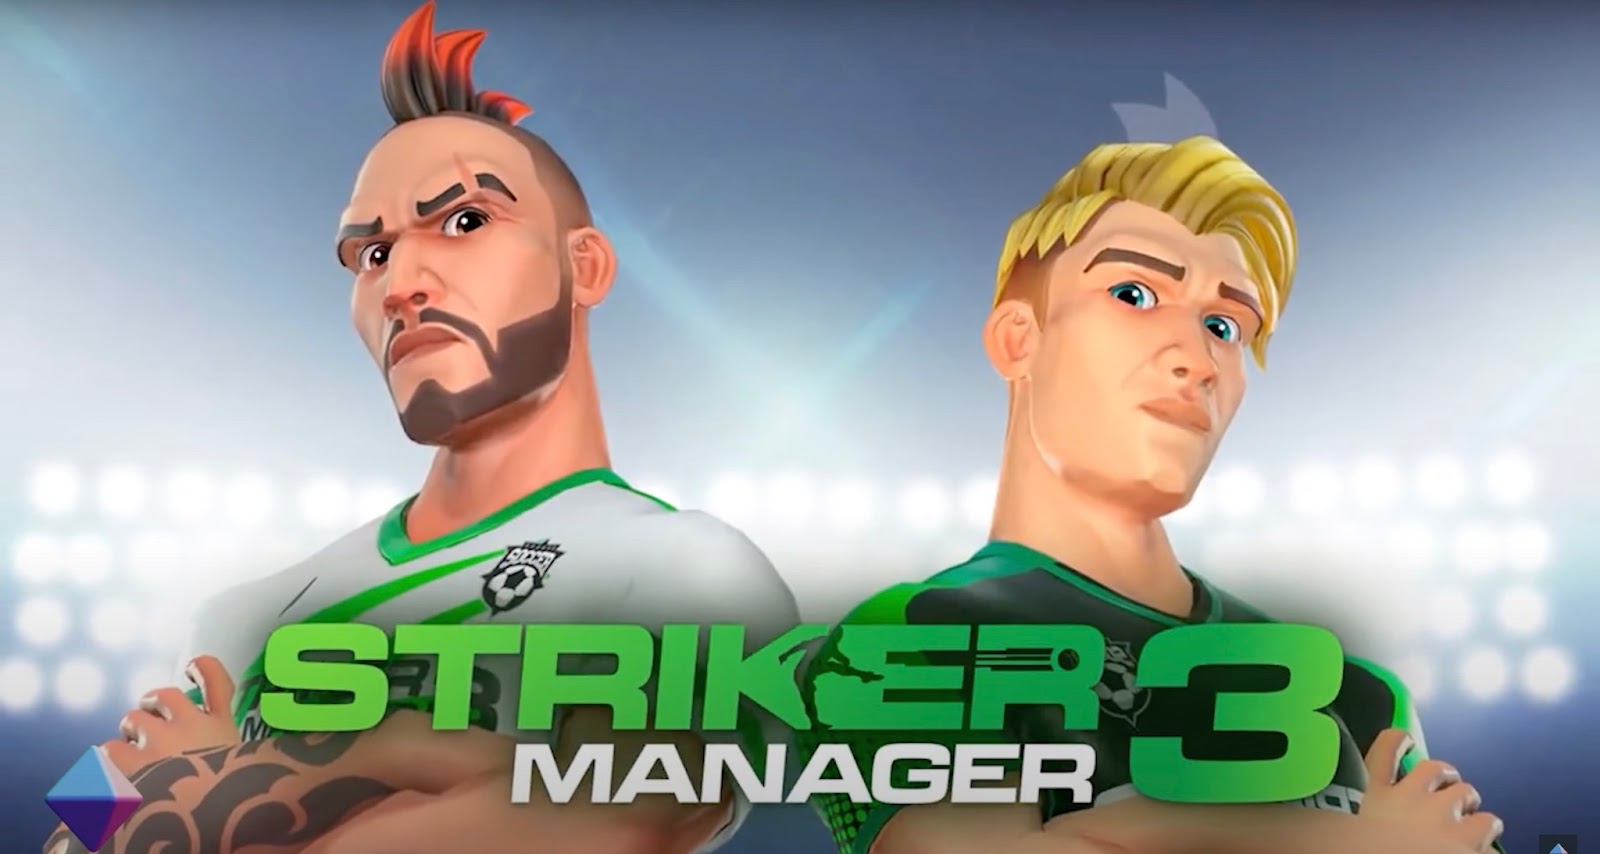 Two game characters next to the inscription Striker Manager 3